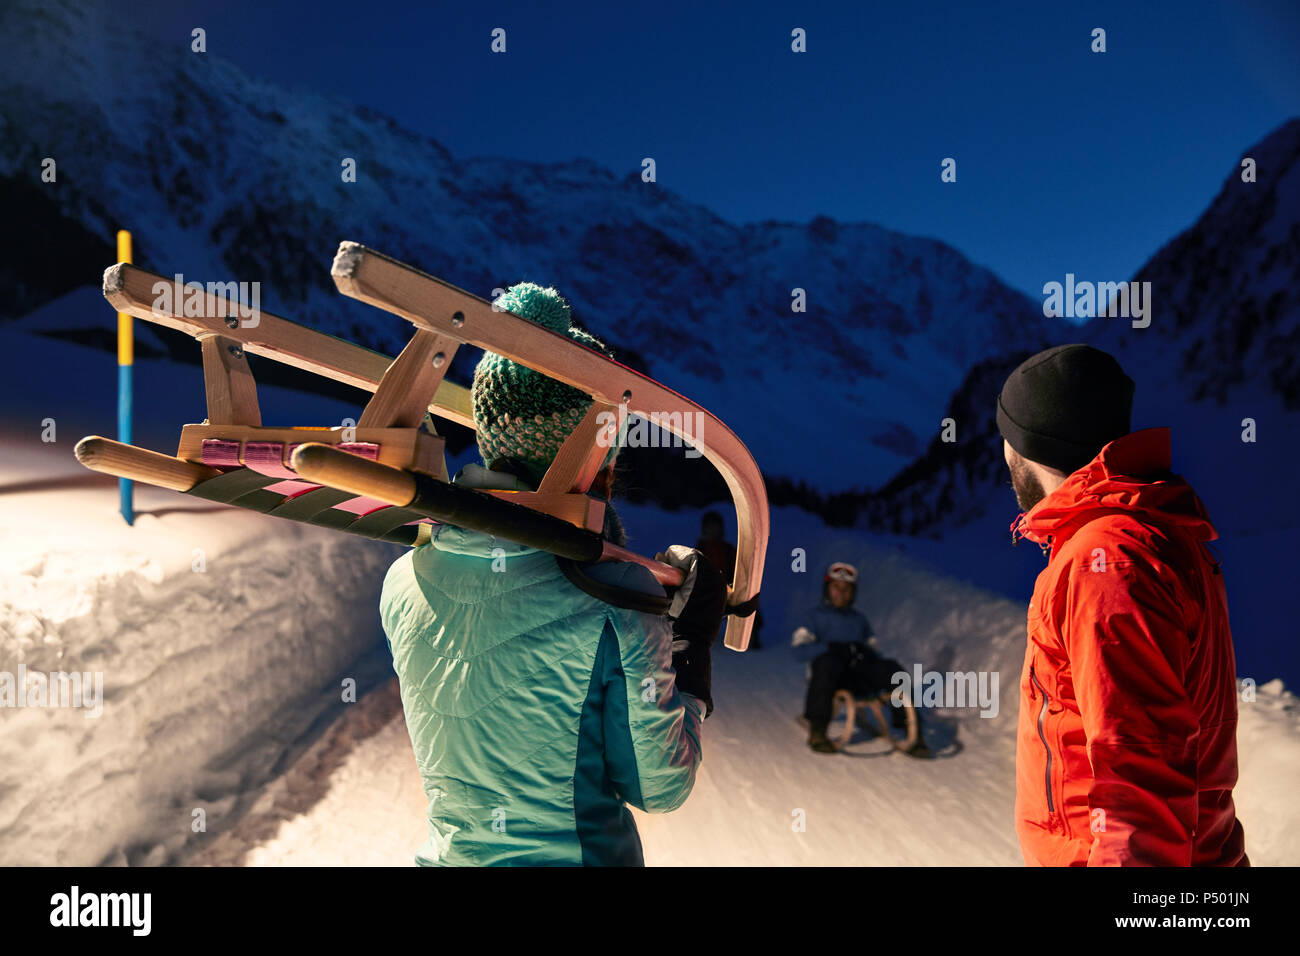 Couple with sledge in snow-covered landscape at night Stock Photo